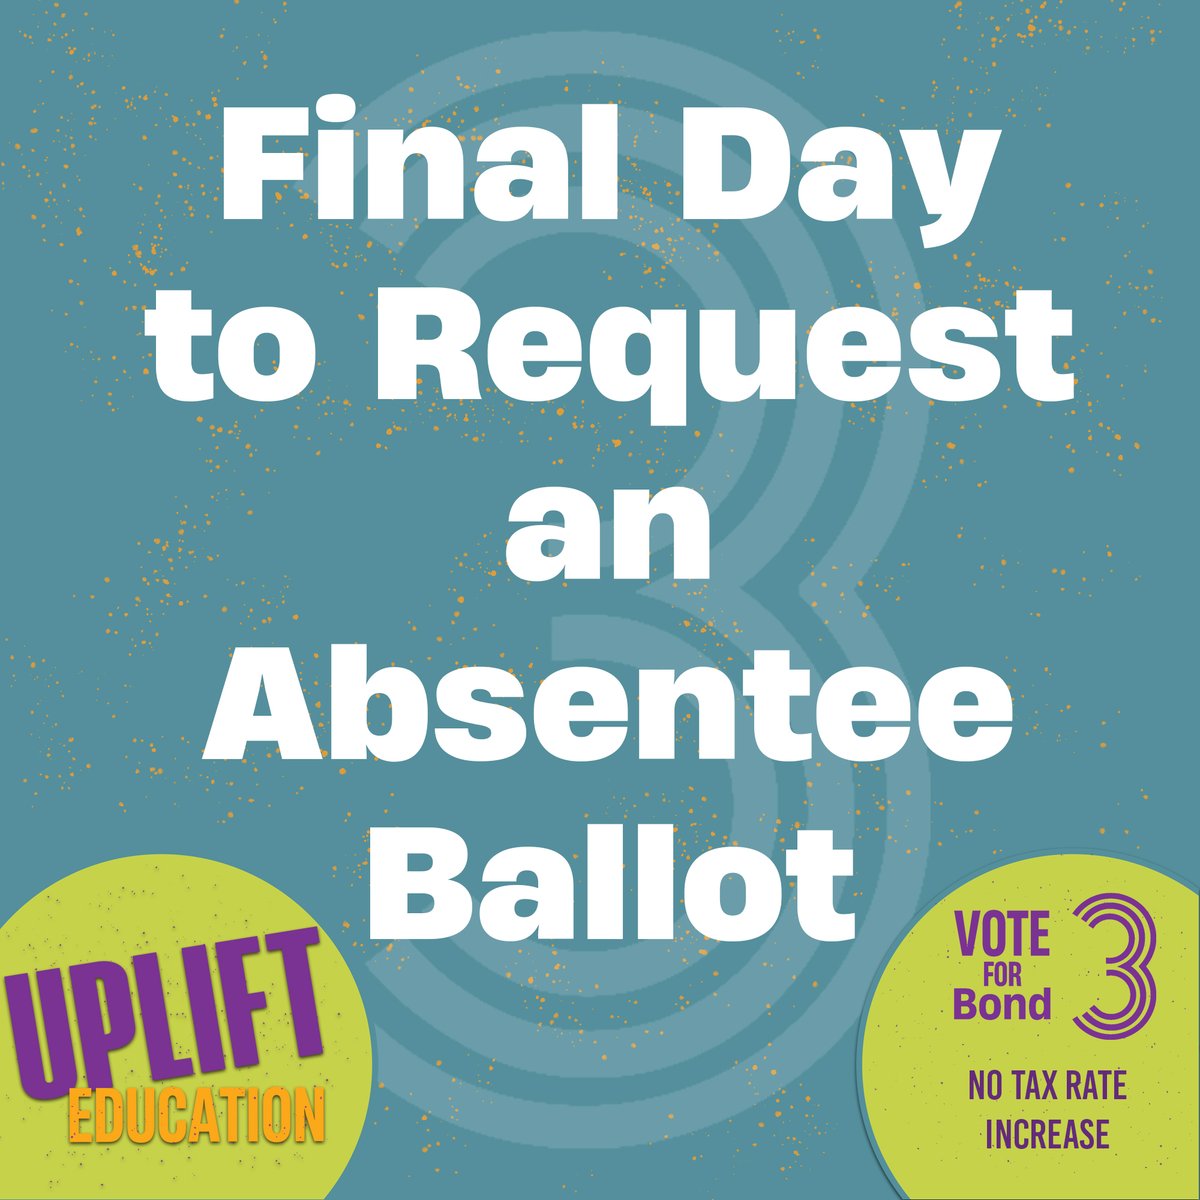 Today is the last day to request an absentee ballot! Make sure your vote is counted and your voice is heard! #Bond3ForNM